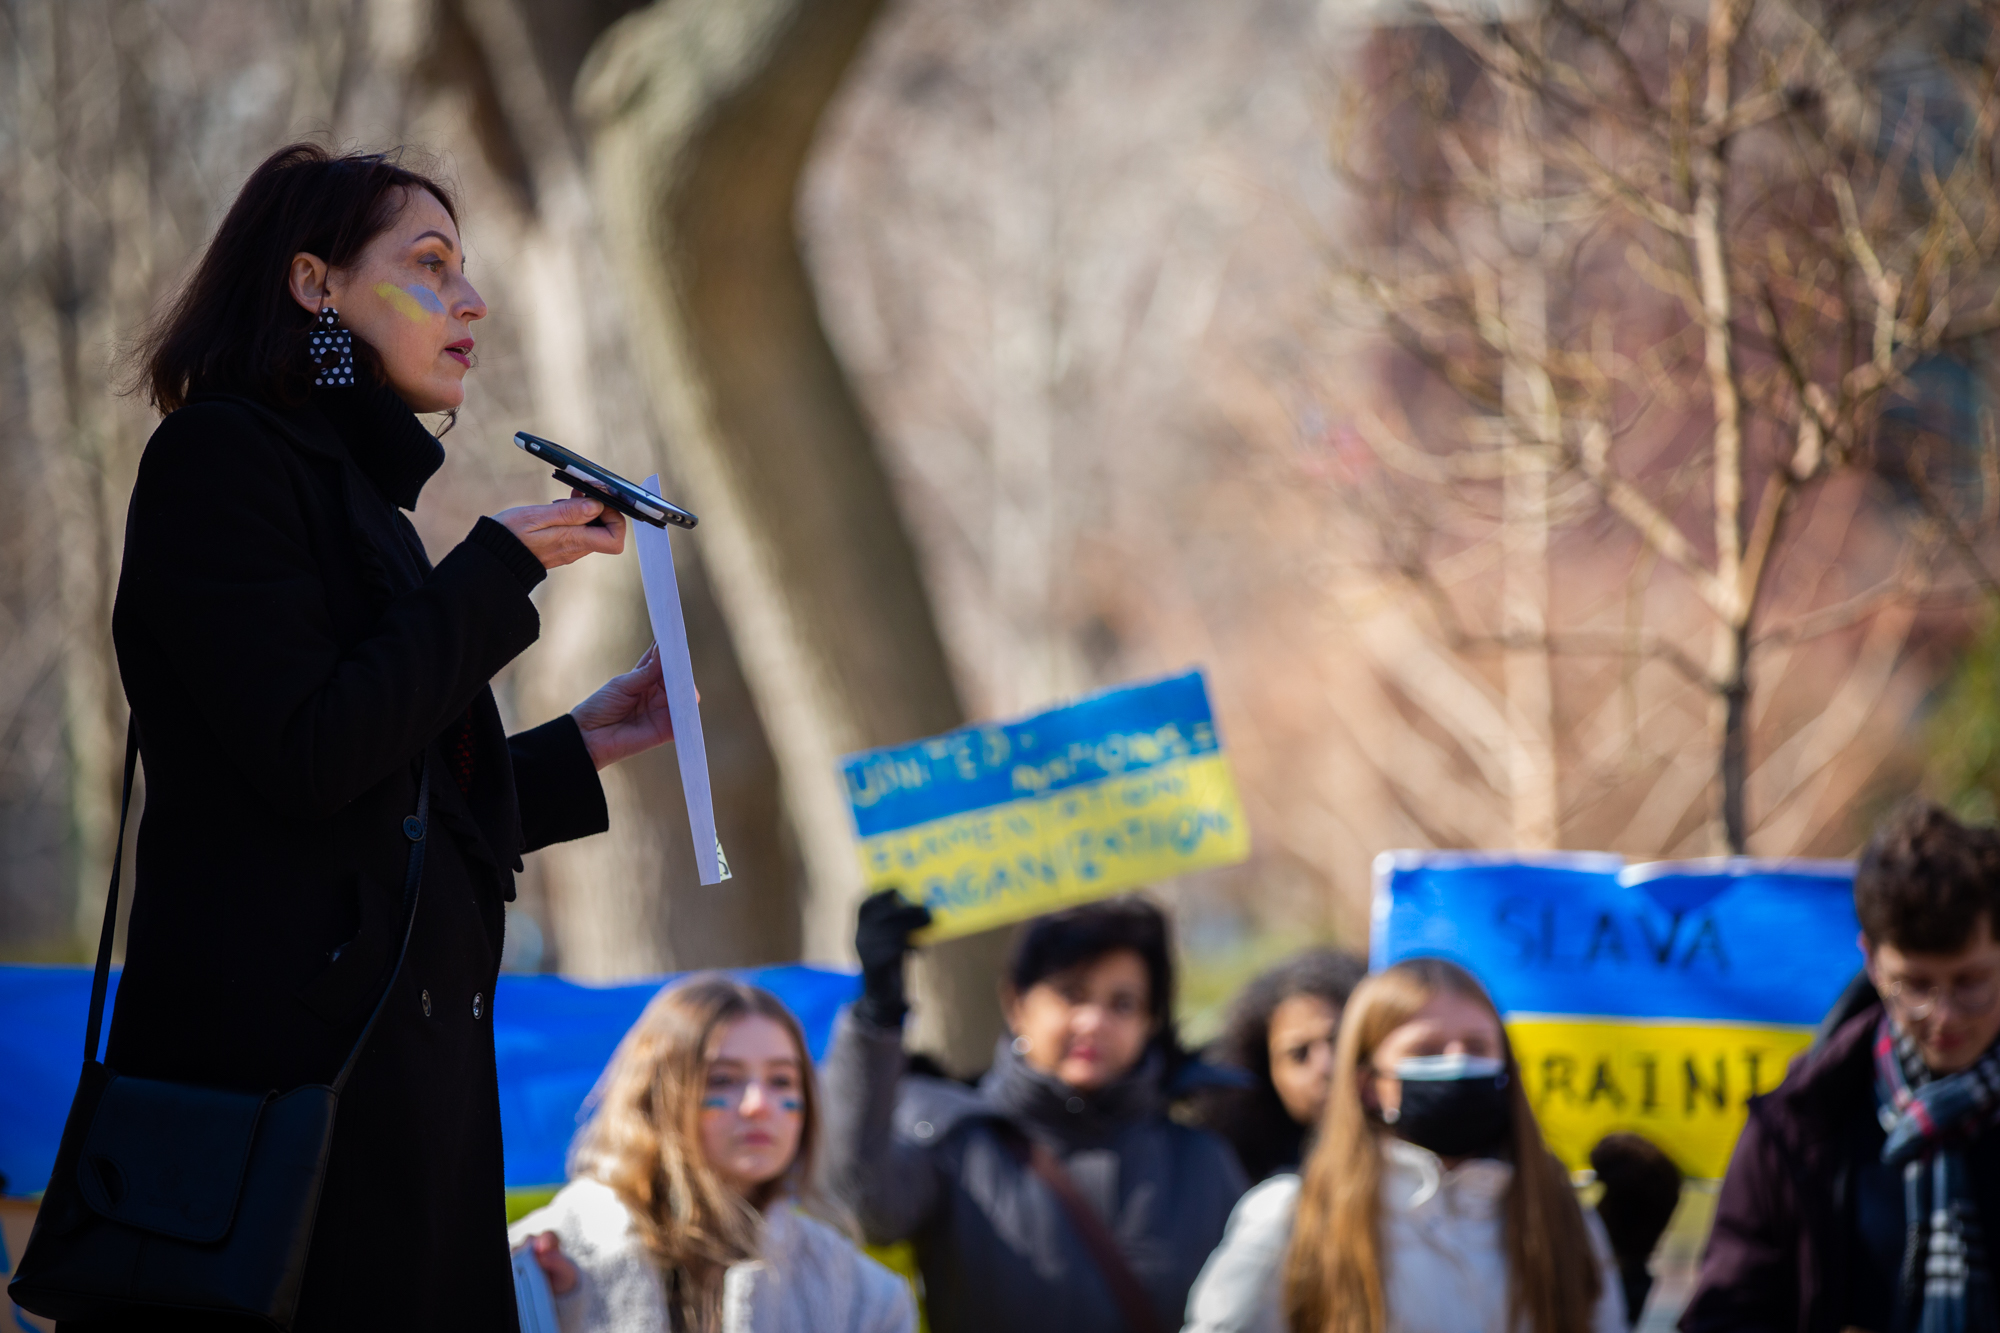 A person speaks at a pro-Ukraine rally on Penn’s campus.